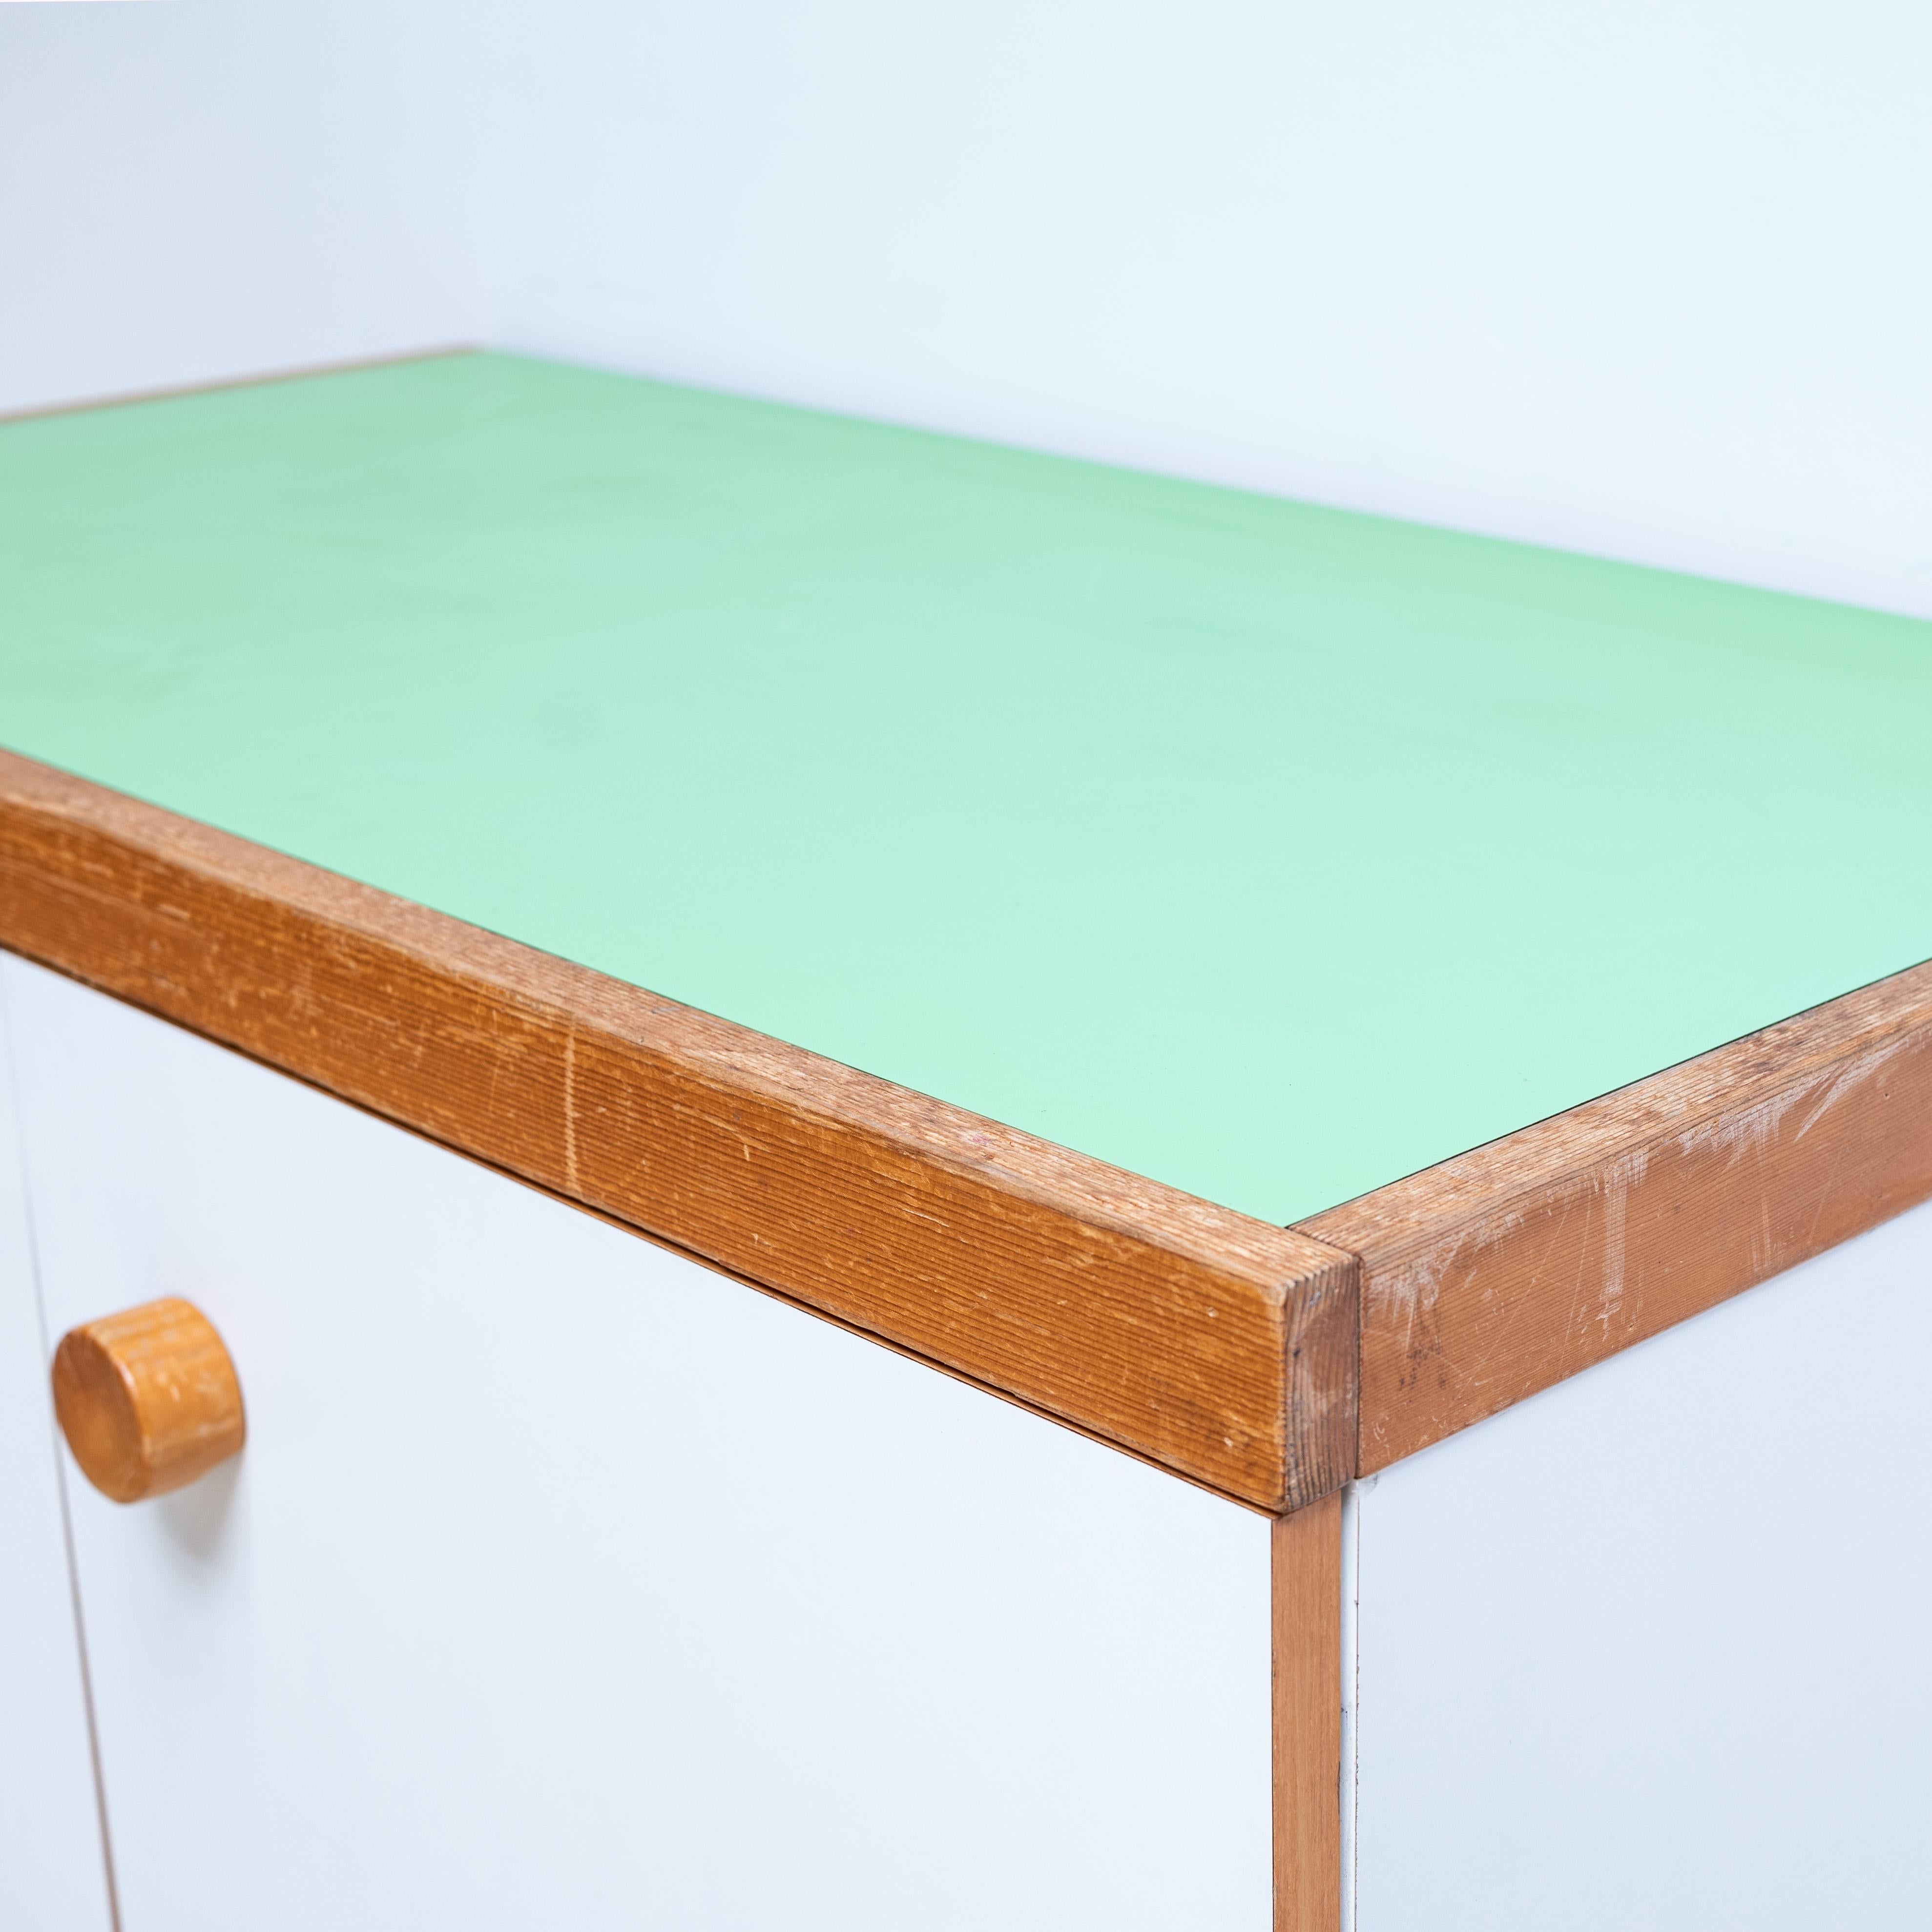 Laminate Charlotte Perriand Side Board from Les Arcs, 2 Doors, Green Top For Sale